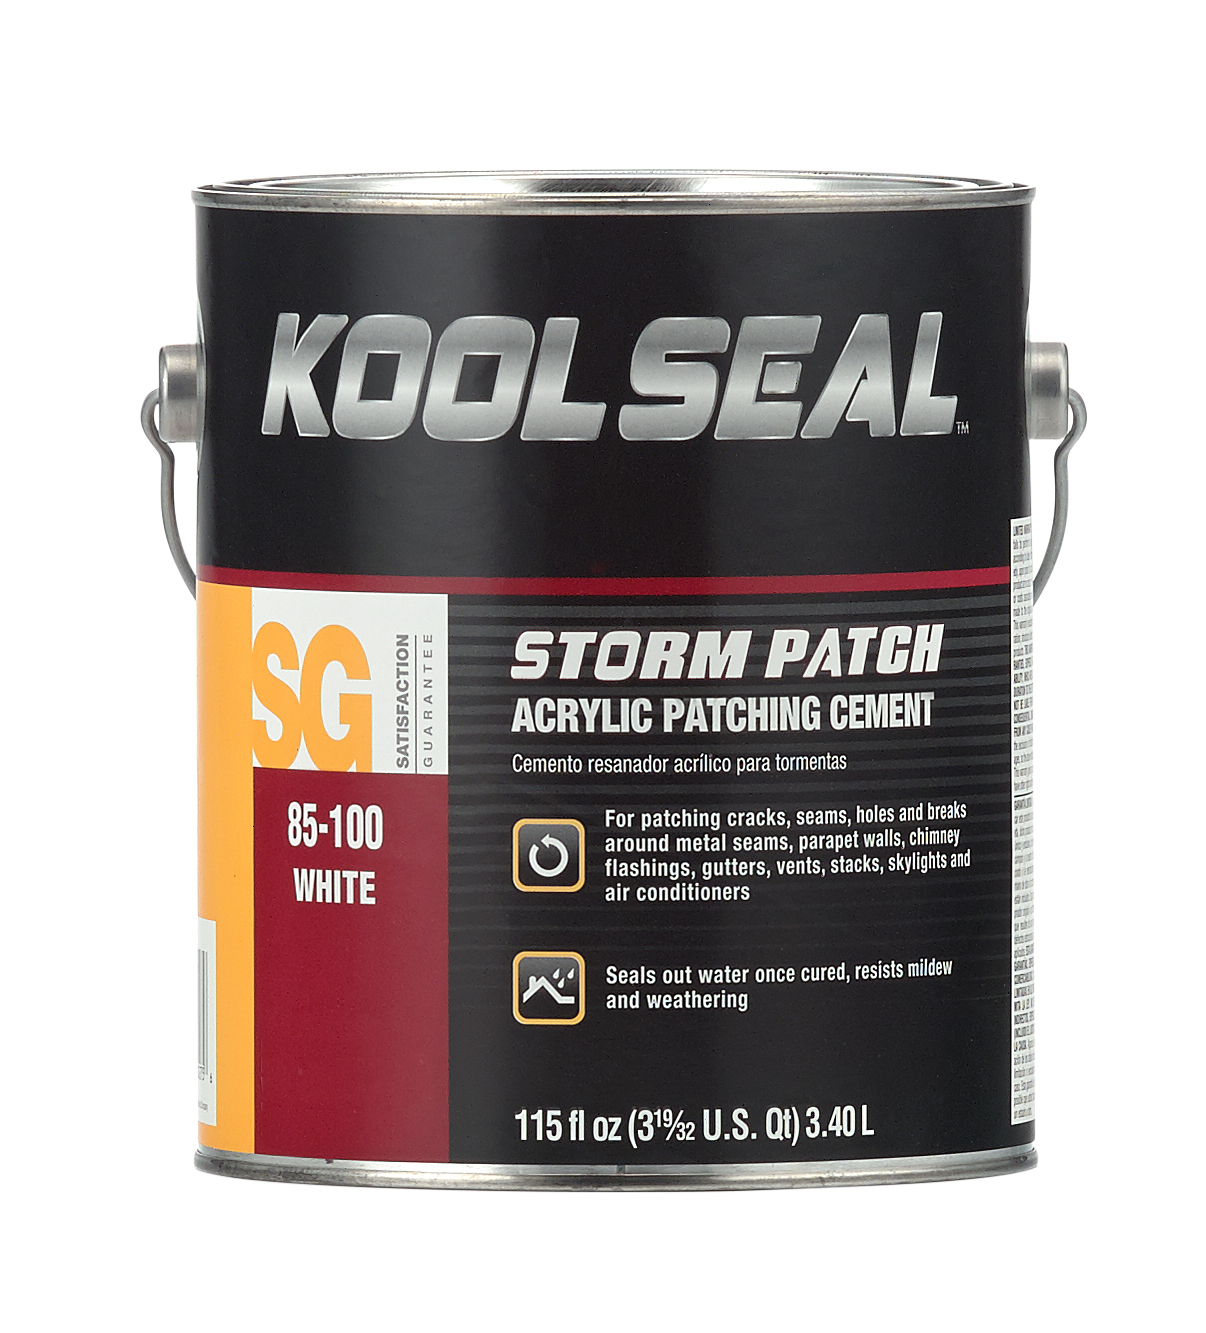 Acrylic Patching Cement White - Koolseal